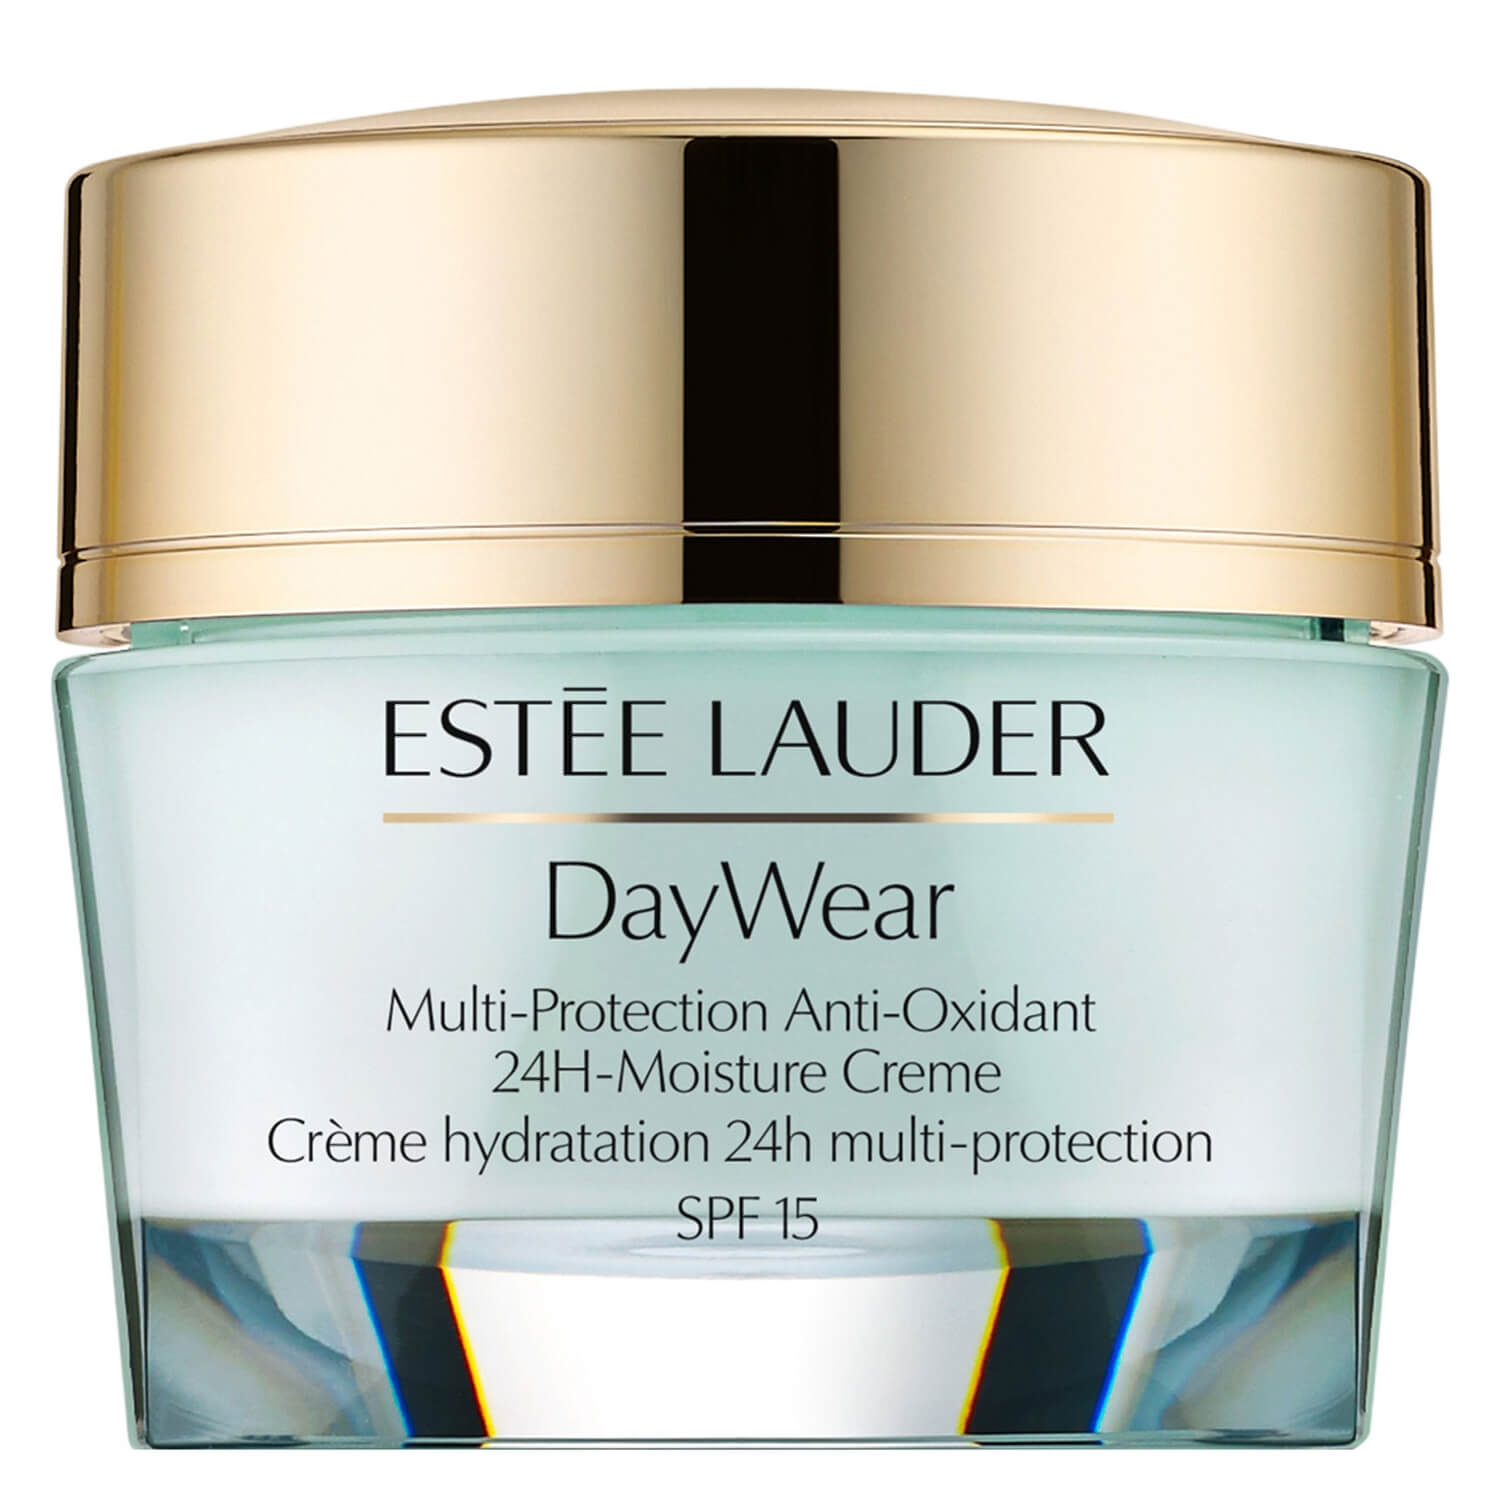 Product image from DayWear - Multi-Protection Anti-Oxidant Creme SPF15 Normal/Combination Skin